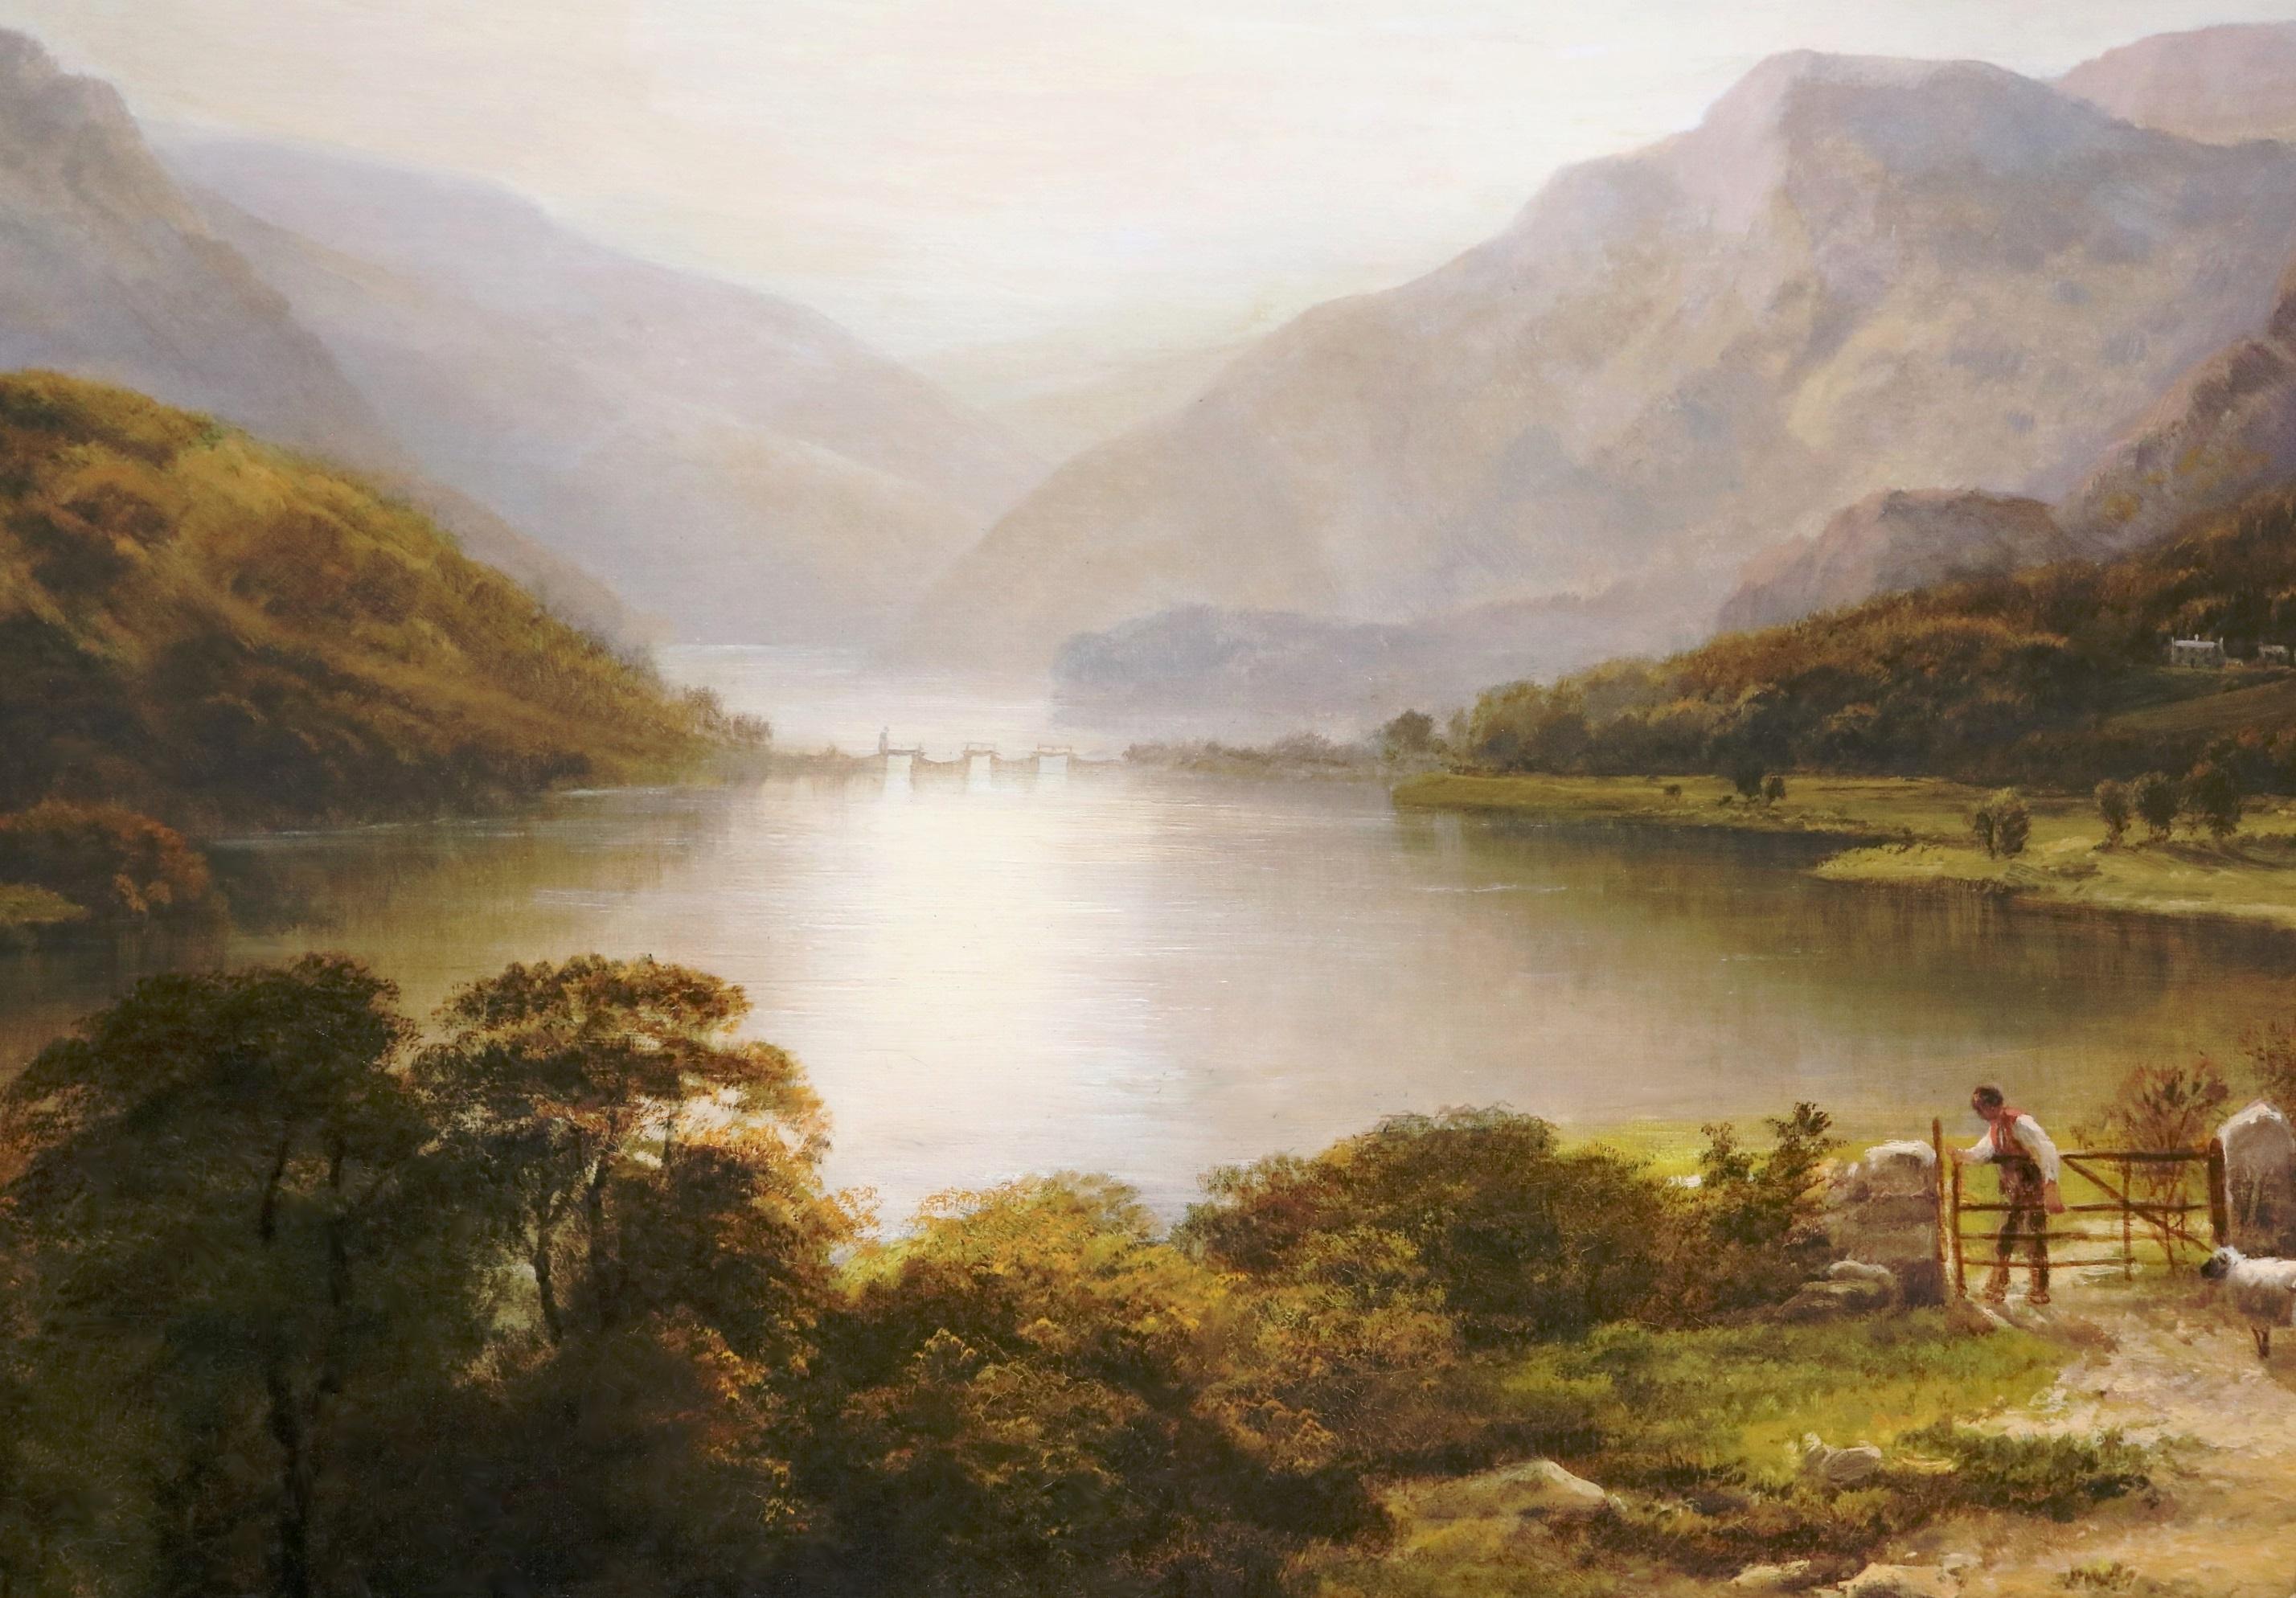 The Lake District - Large 19th Century English Sunset Landscape Painting 3